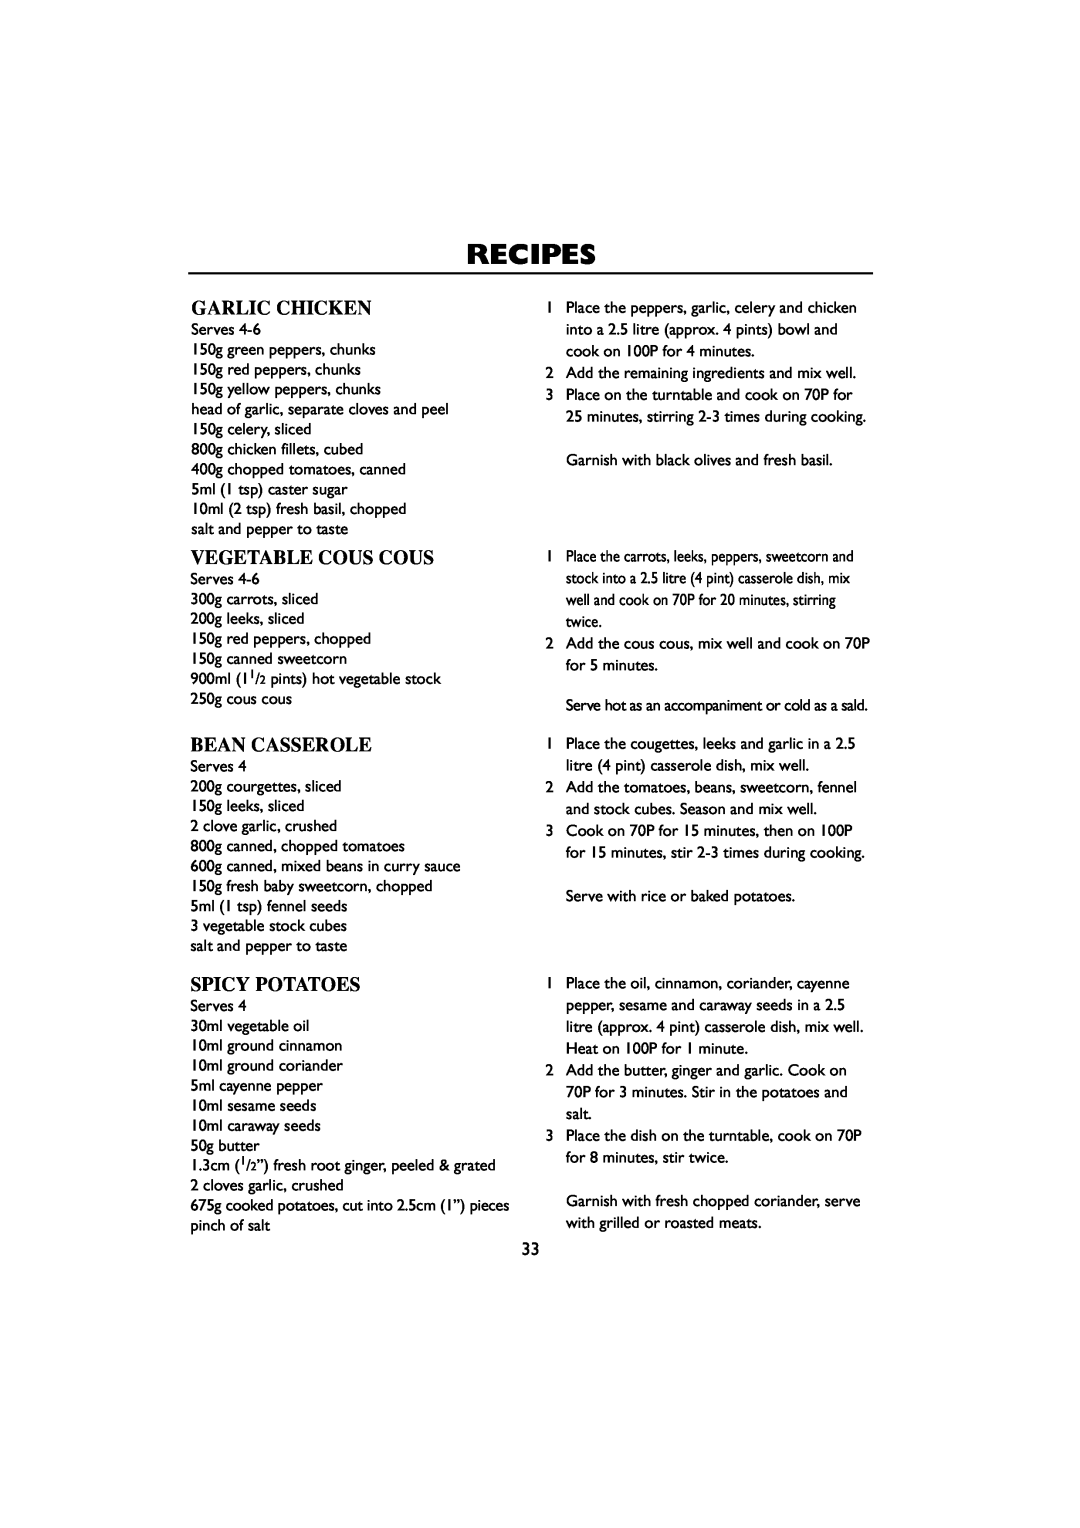 Sharp R-259 operation manual Garlic Chicken, Vegetable Cous Cous, Bean Casserole, Spicy Potatoes, Recipes 